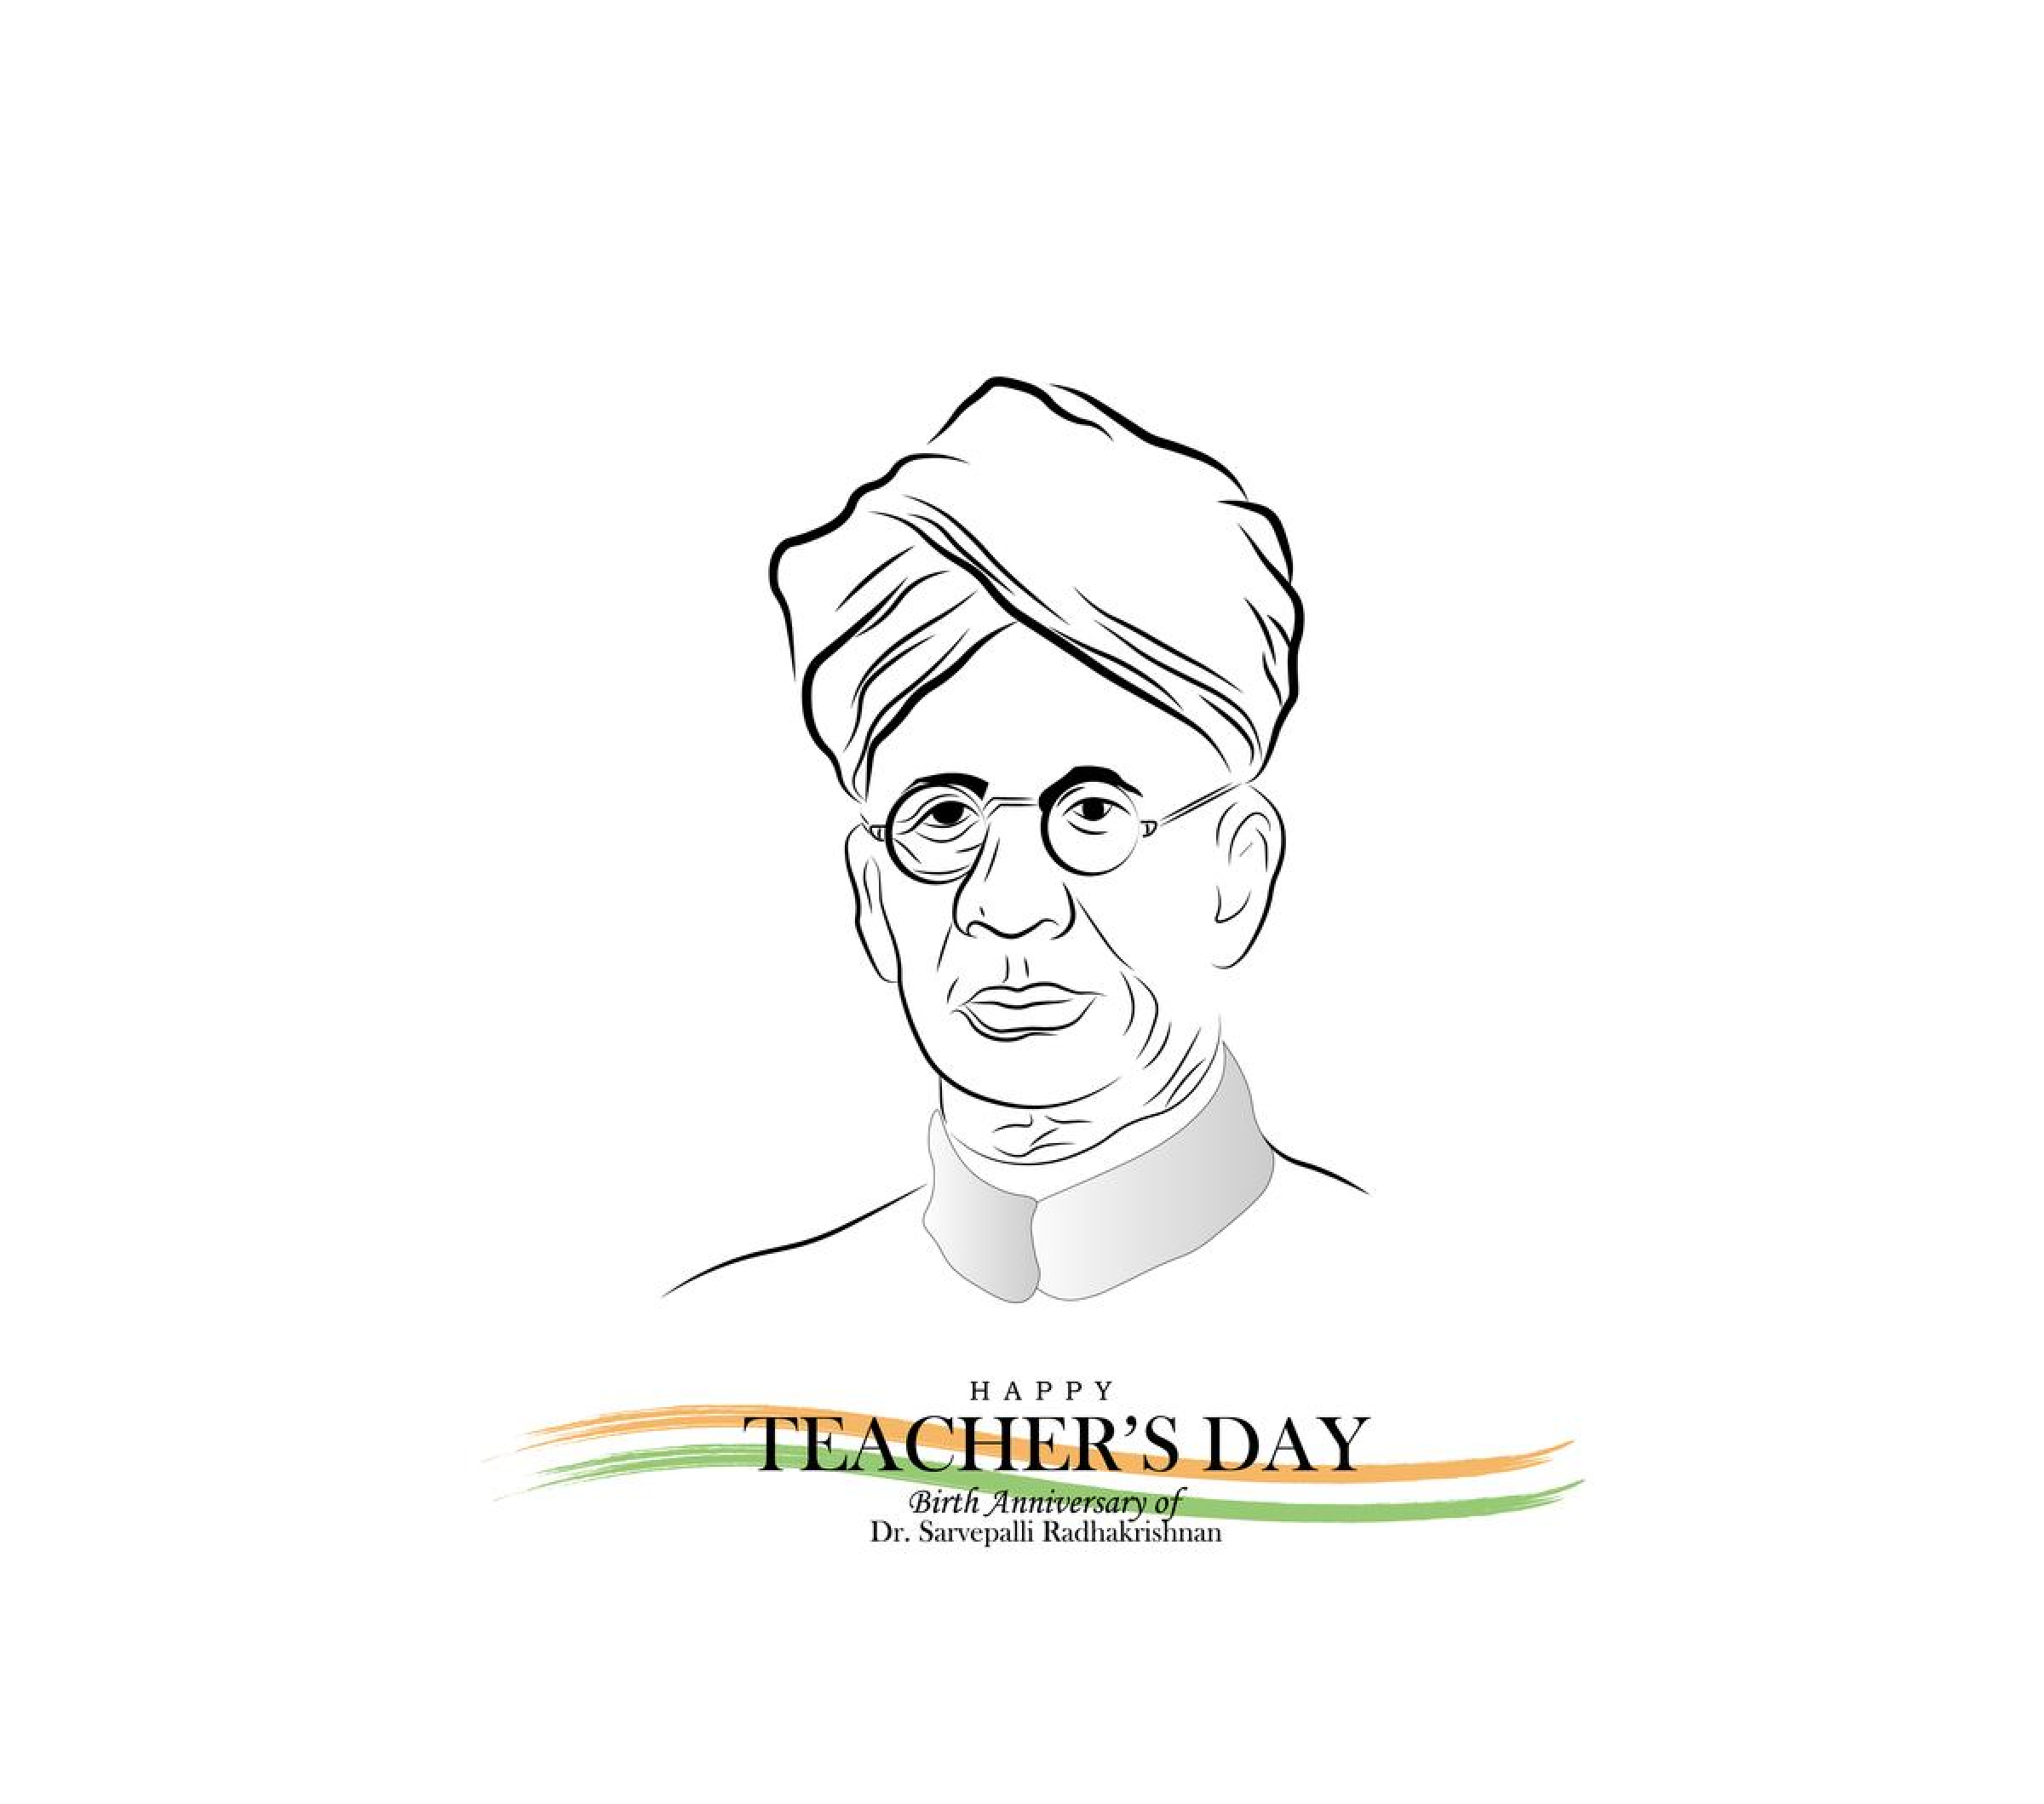 Teacher's day Special drawing of Sarvepalli Radhakrishnan || How to draw  Sarvepalli Radhakrishnan - YouTube